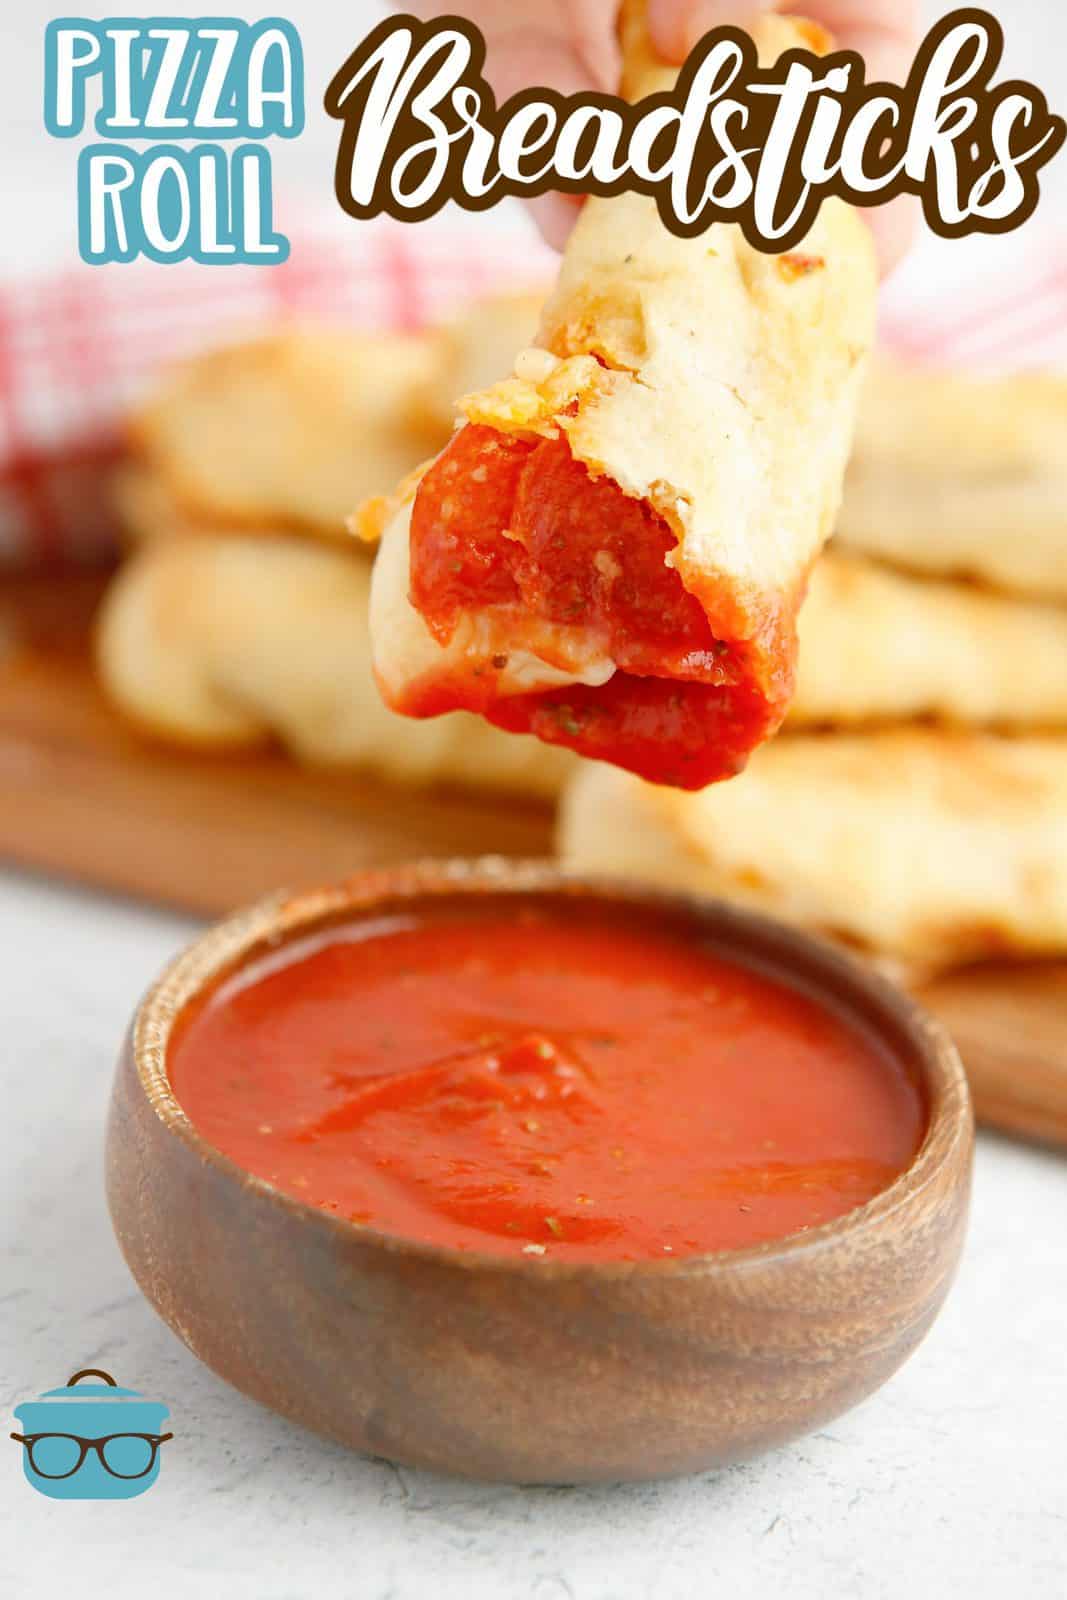 Pinterest image of one Pepperoni Roll Breadstick dipped in marinara sauce.